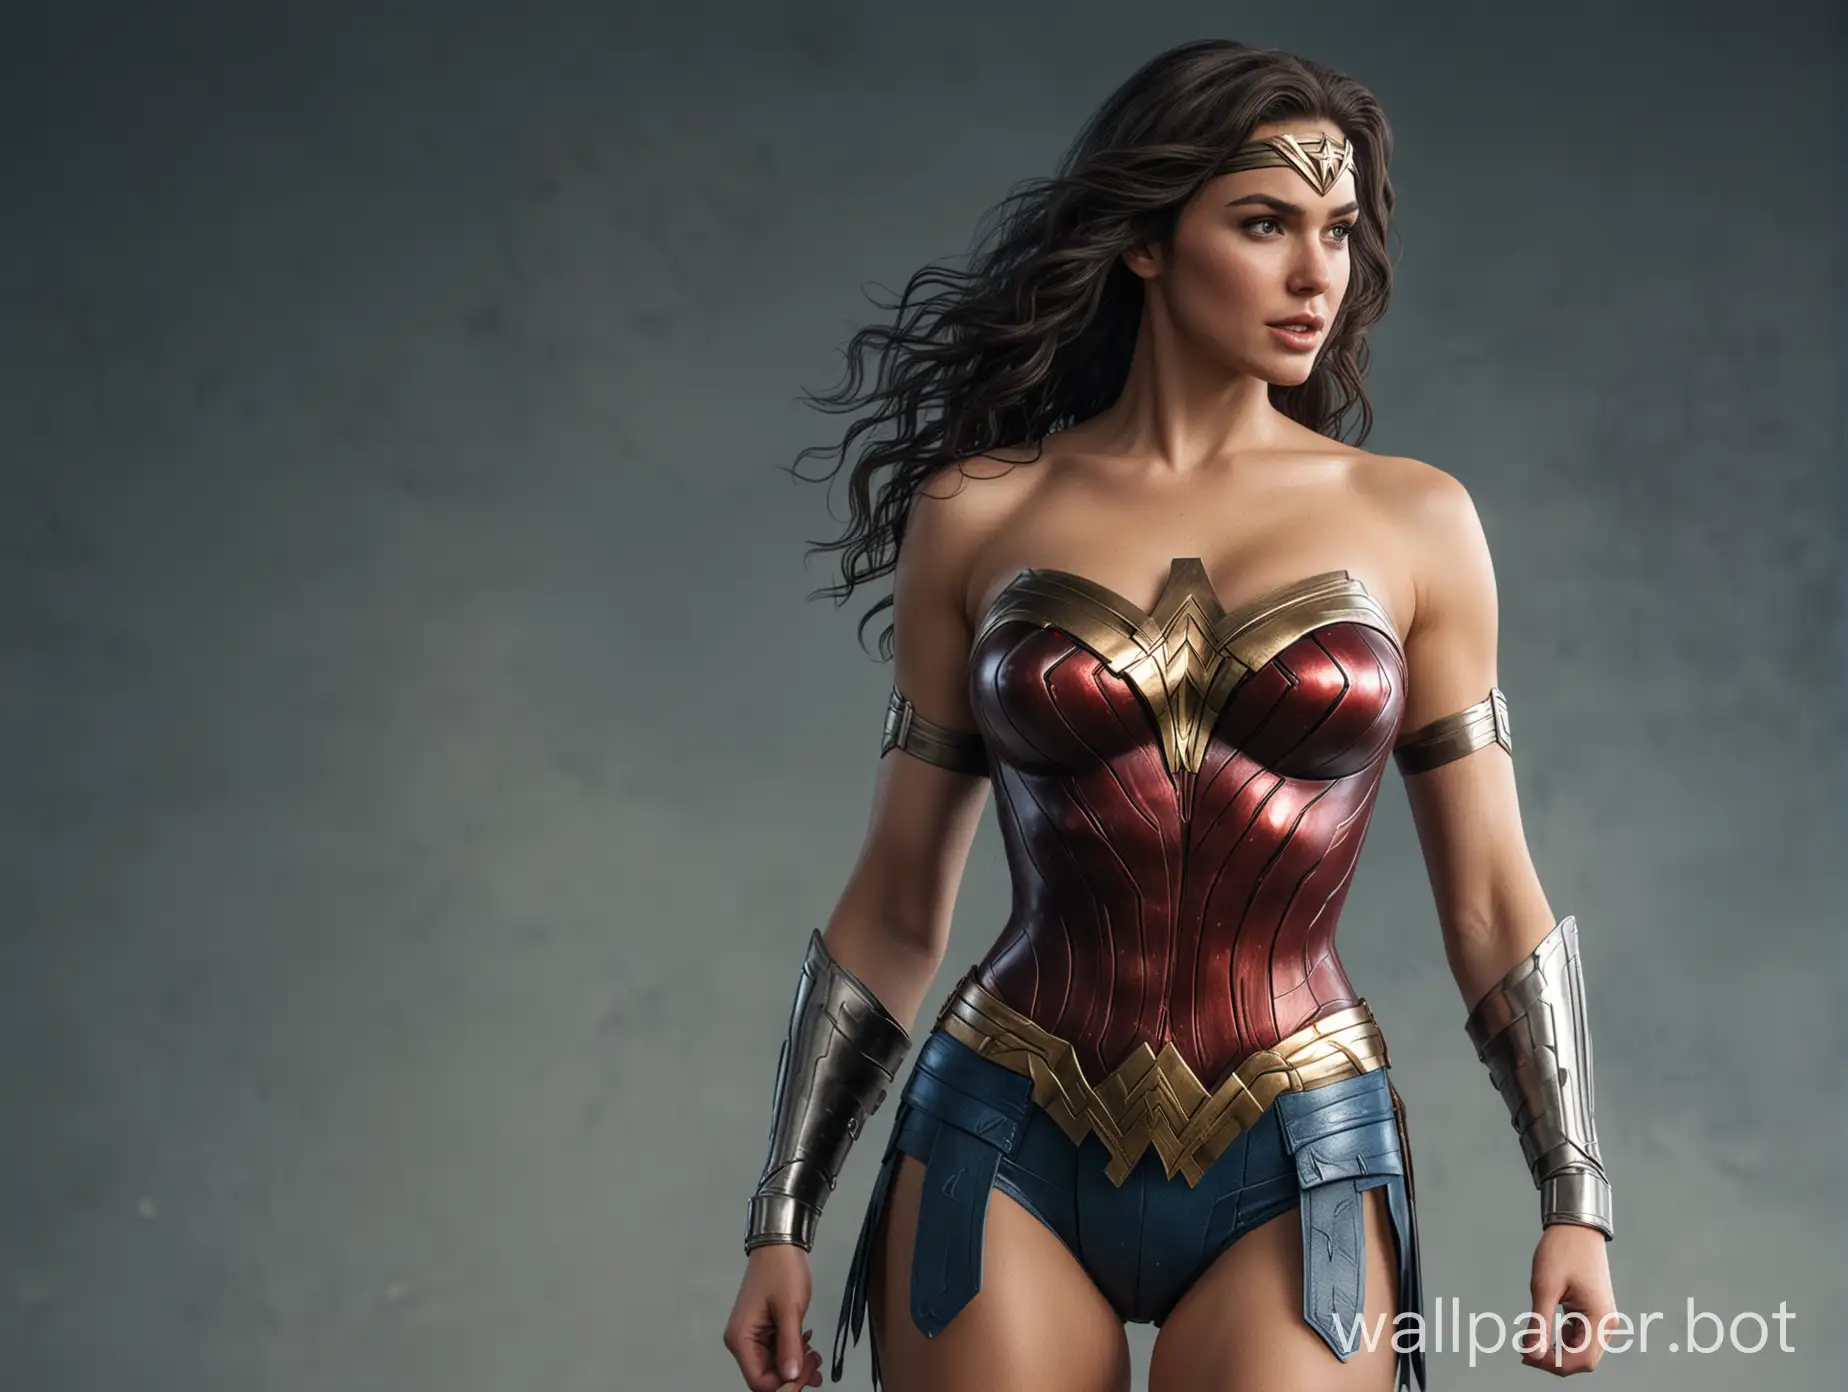 Powerful-Wonder-Woman-with-Striking-Physique-in-High-Dynamic-Range-HDR-8K-Detail-Full-Body-View